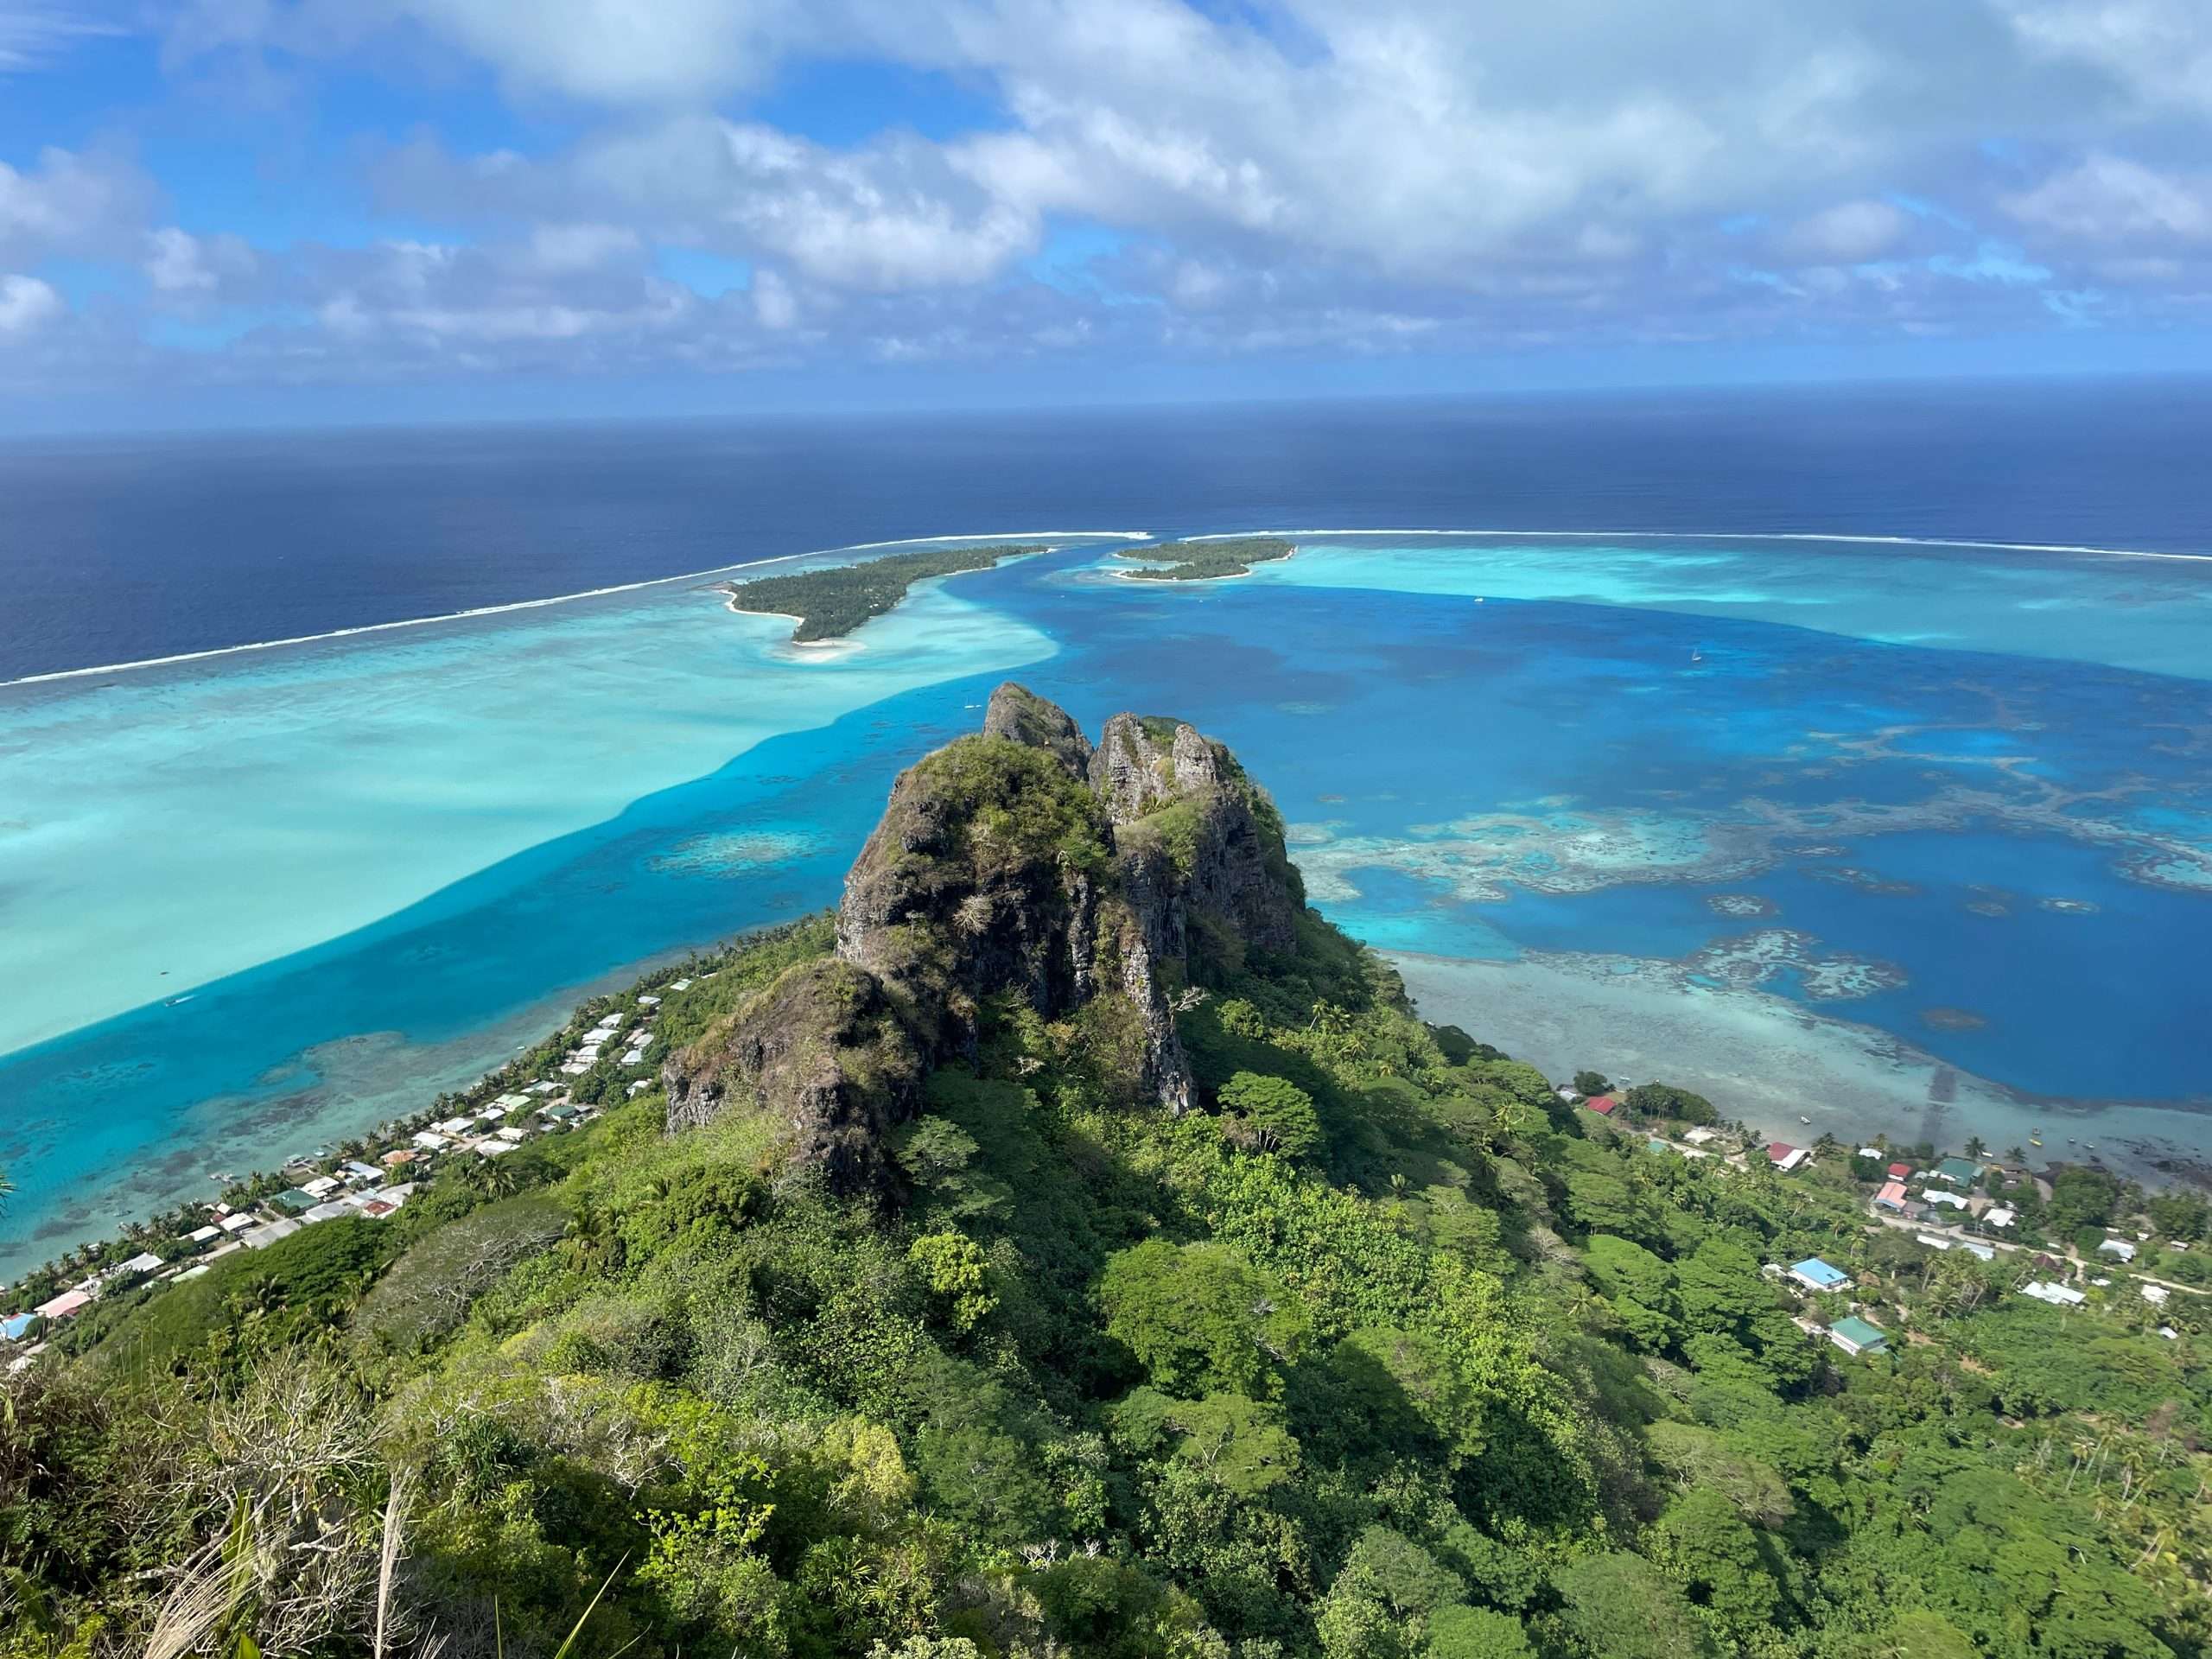 explore the beauty of tahiti with our ultimate travel guide. discover top attractions, activities, and travel tips for your dream holiday in tahiti.